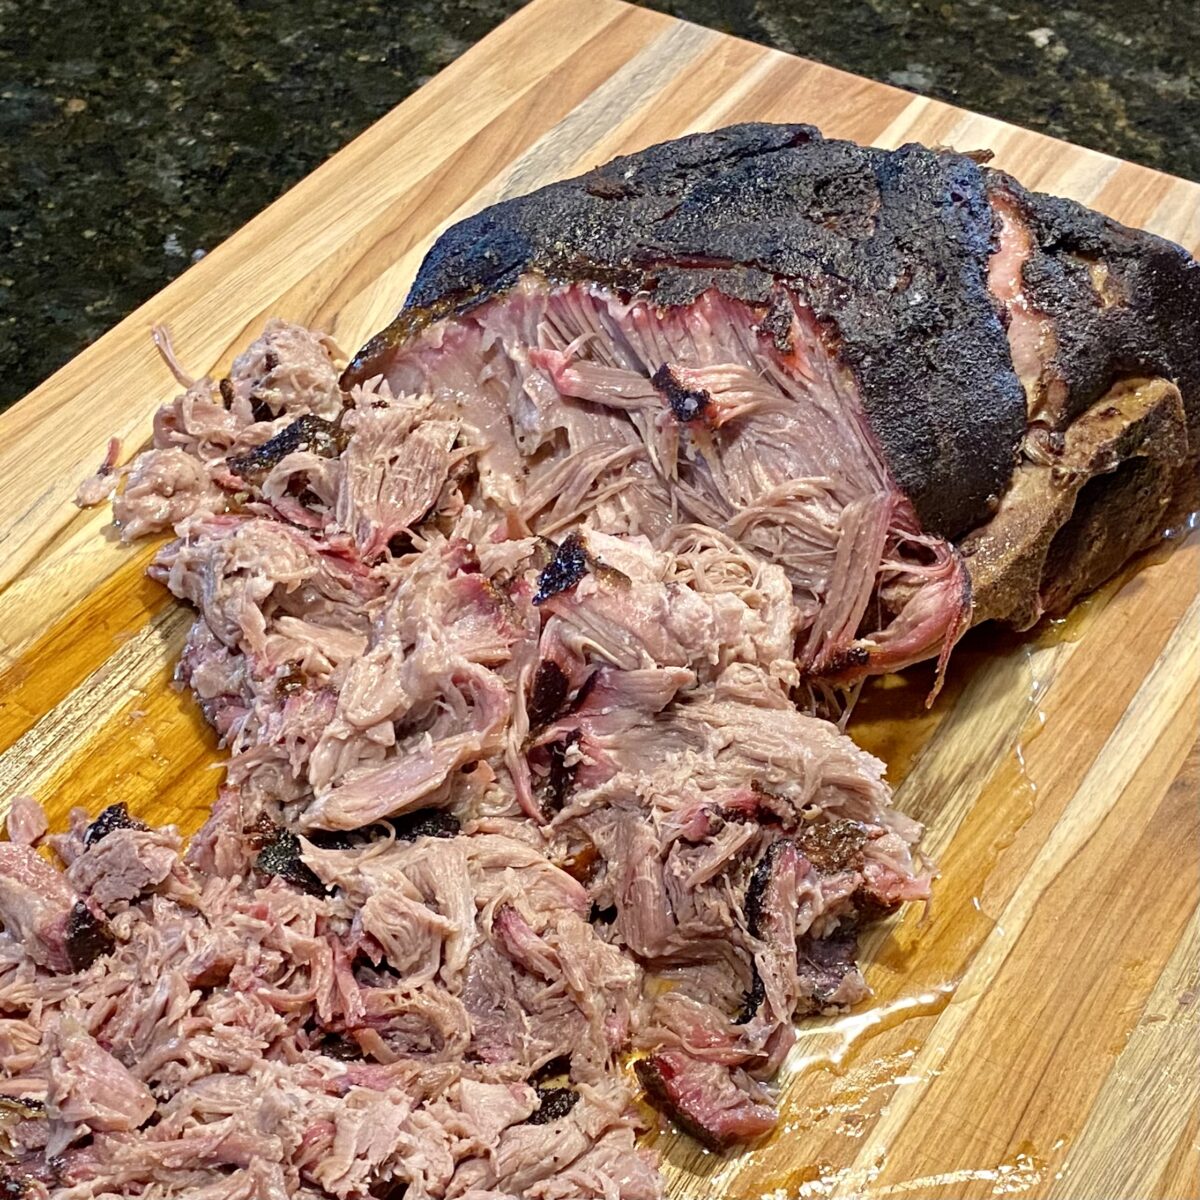 Side view of smoked pork butt that that has been partially pulled positioned on a cutting board.